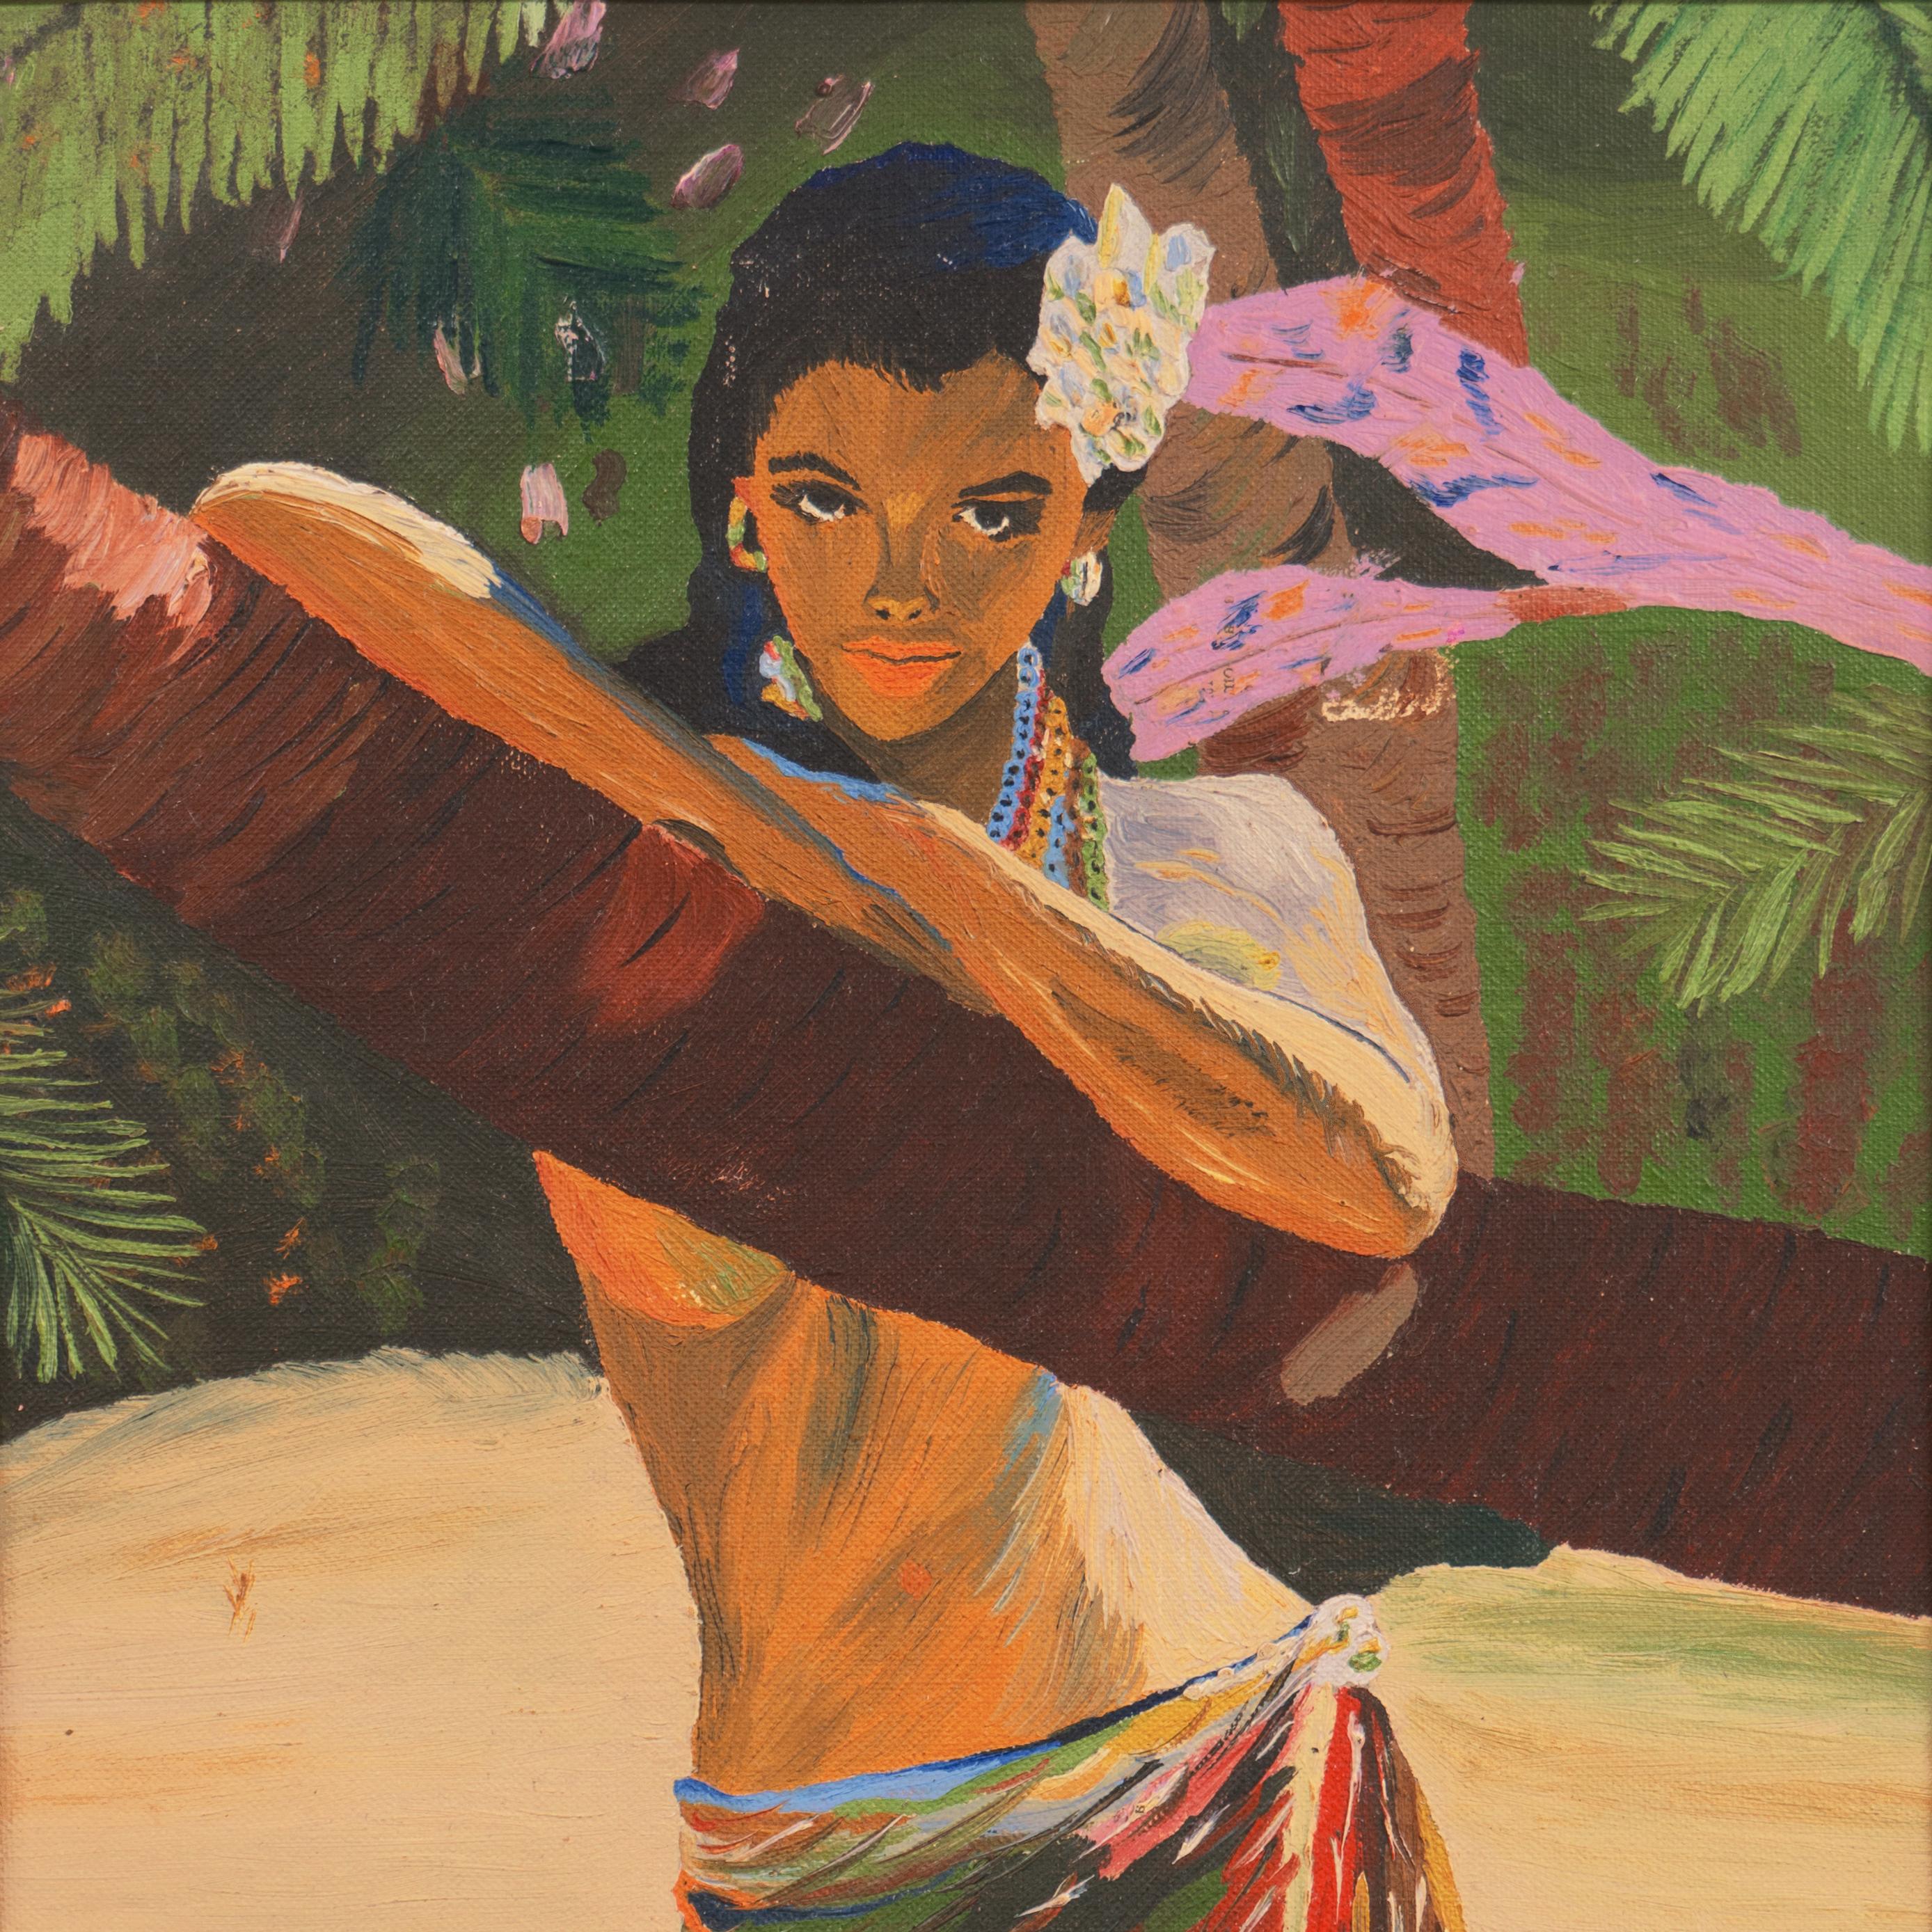 'Tropical Beach Beauty', Long Beach Art Association, Fiji, Pacific, South Seas - Post-Impressionist Painting by Gregory Conway